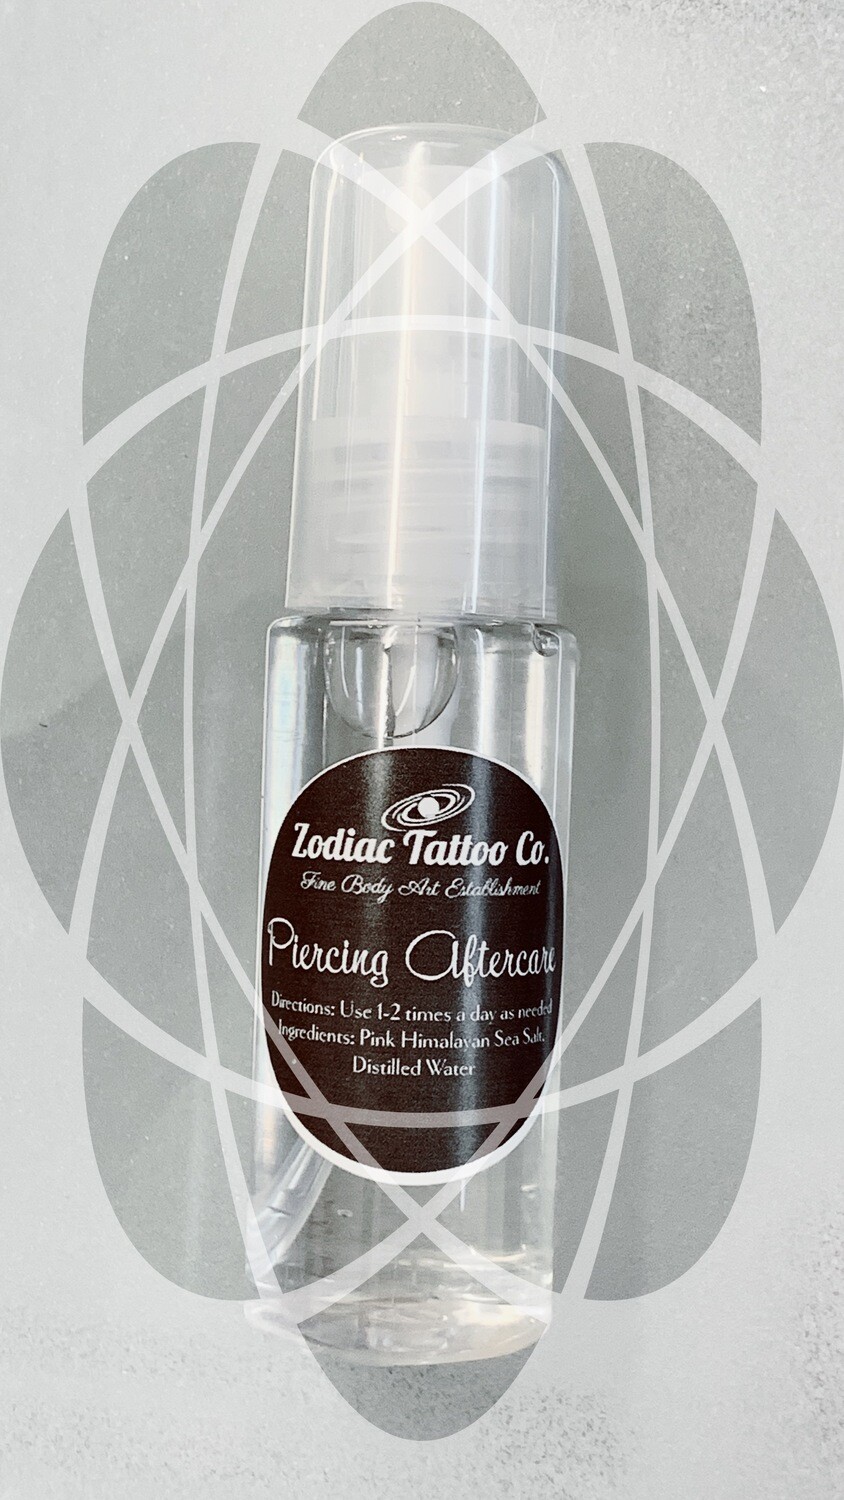 ZTC Piercing Aftercare Spray